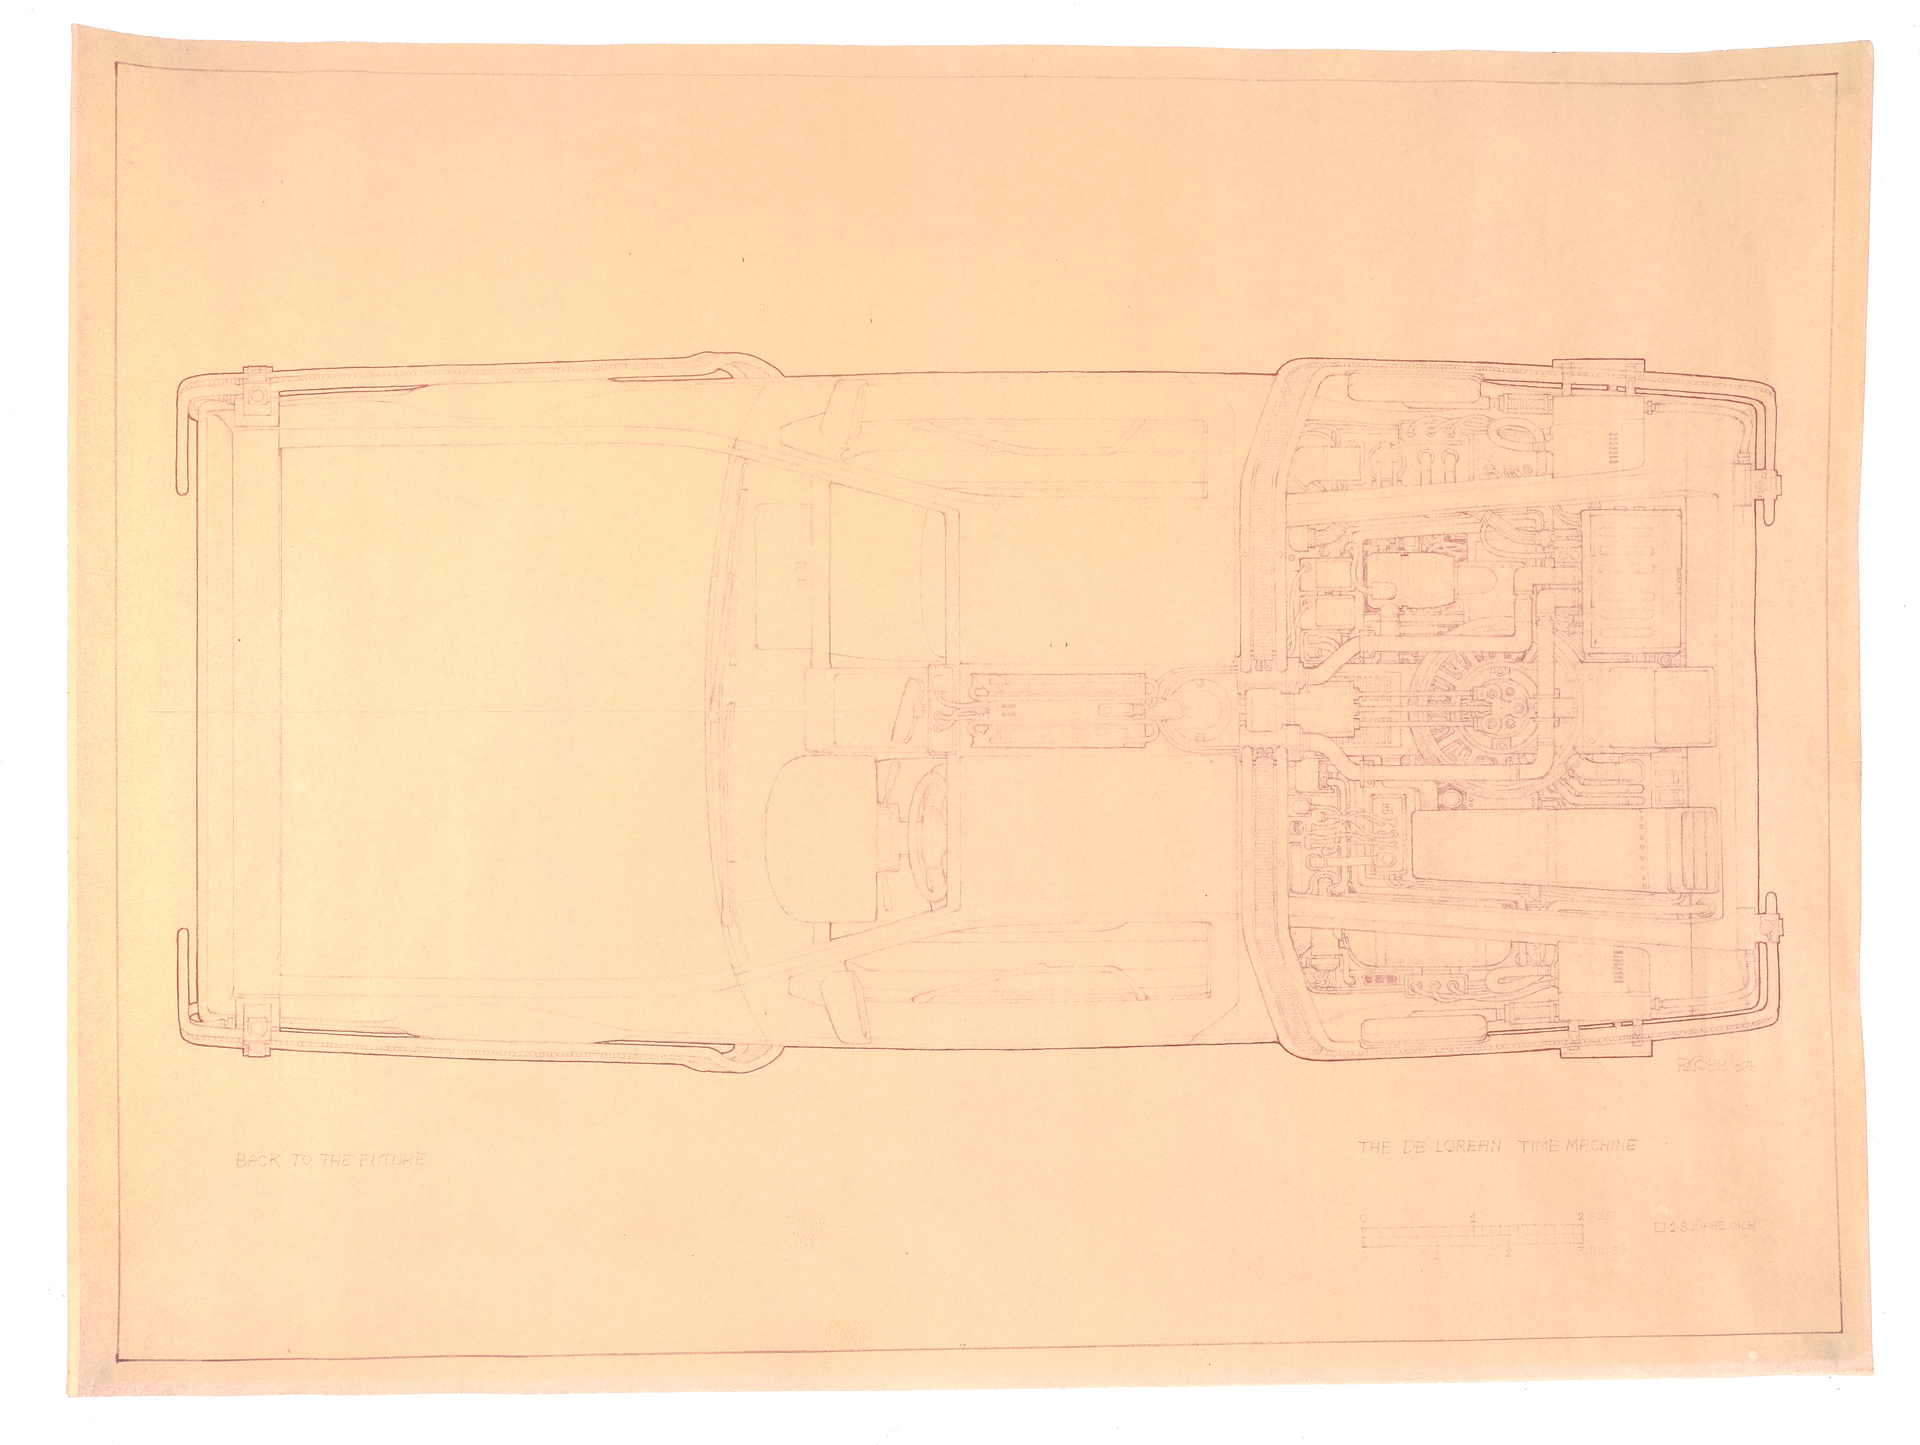 BACK TO THE FUTURE - Pair of Printed Ron Cobb DeLorean Time Machine Blueprints - Image 3 of 4